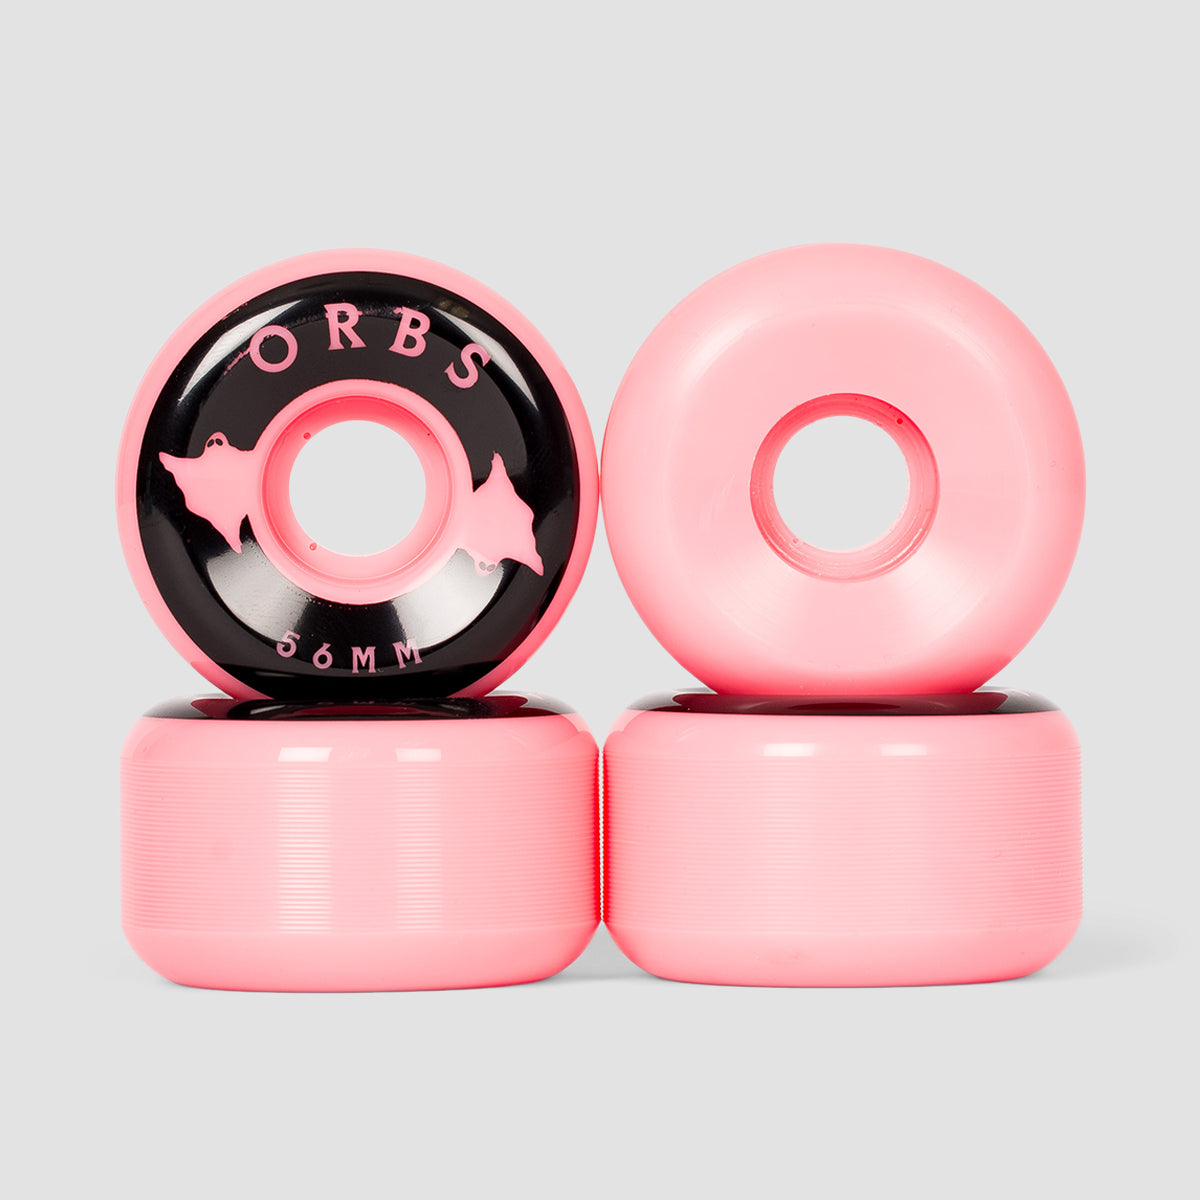 Welcome Orbs Specters Solid Conical 99A Skateboard Wheels Coral 56mm